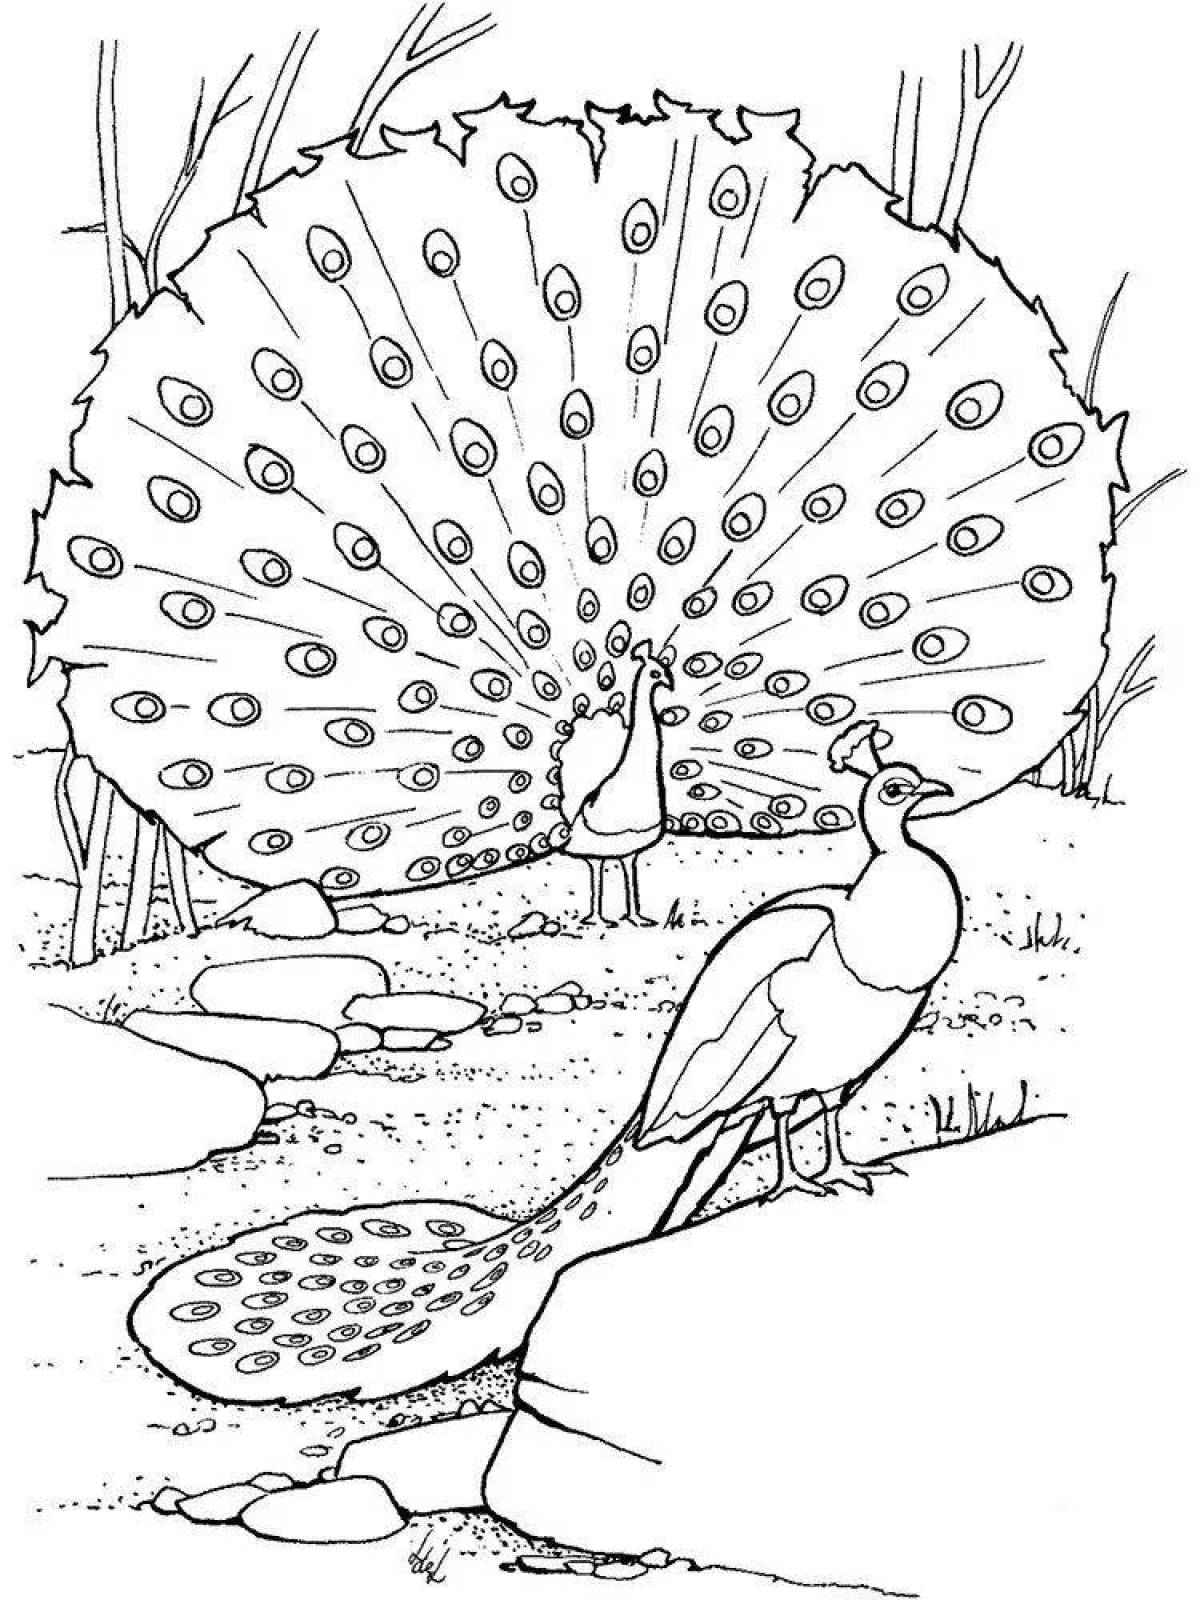 Glowing nature and animals coloring page